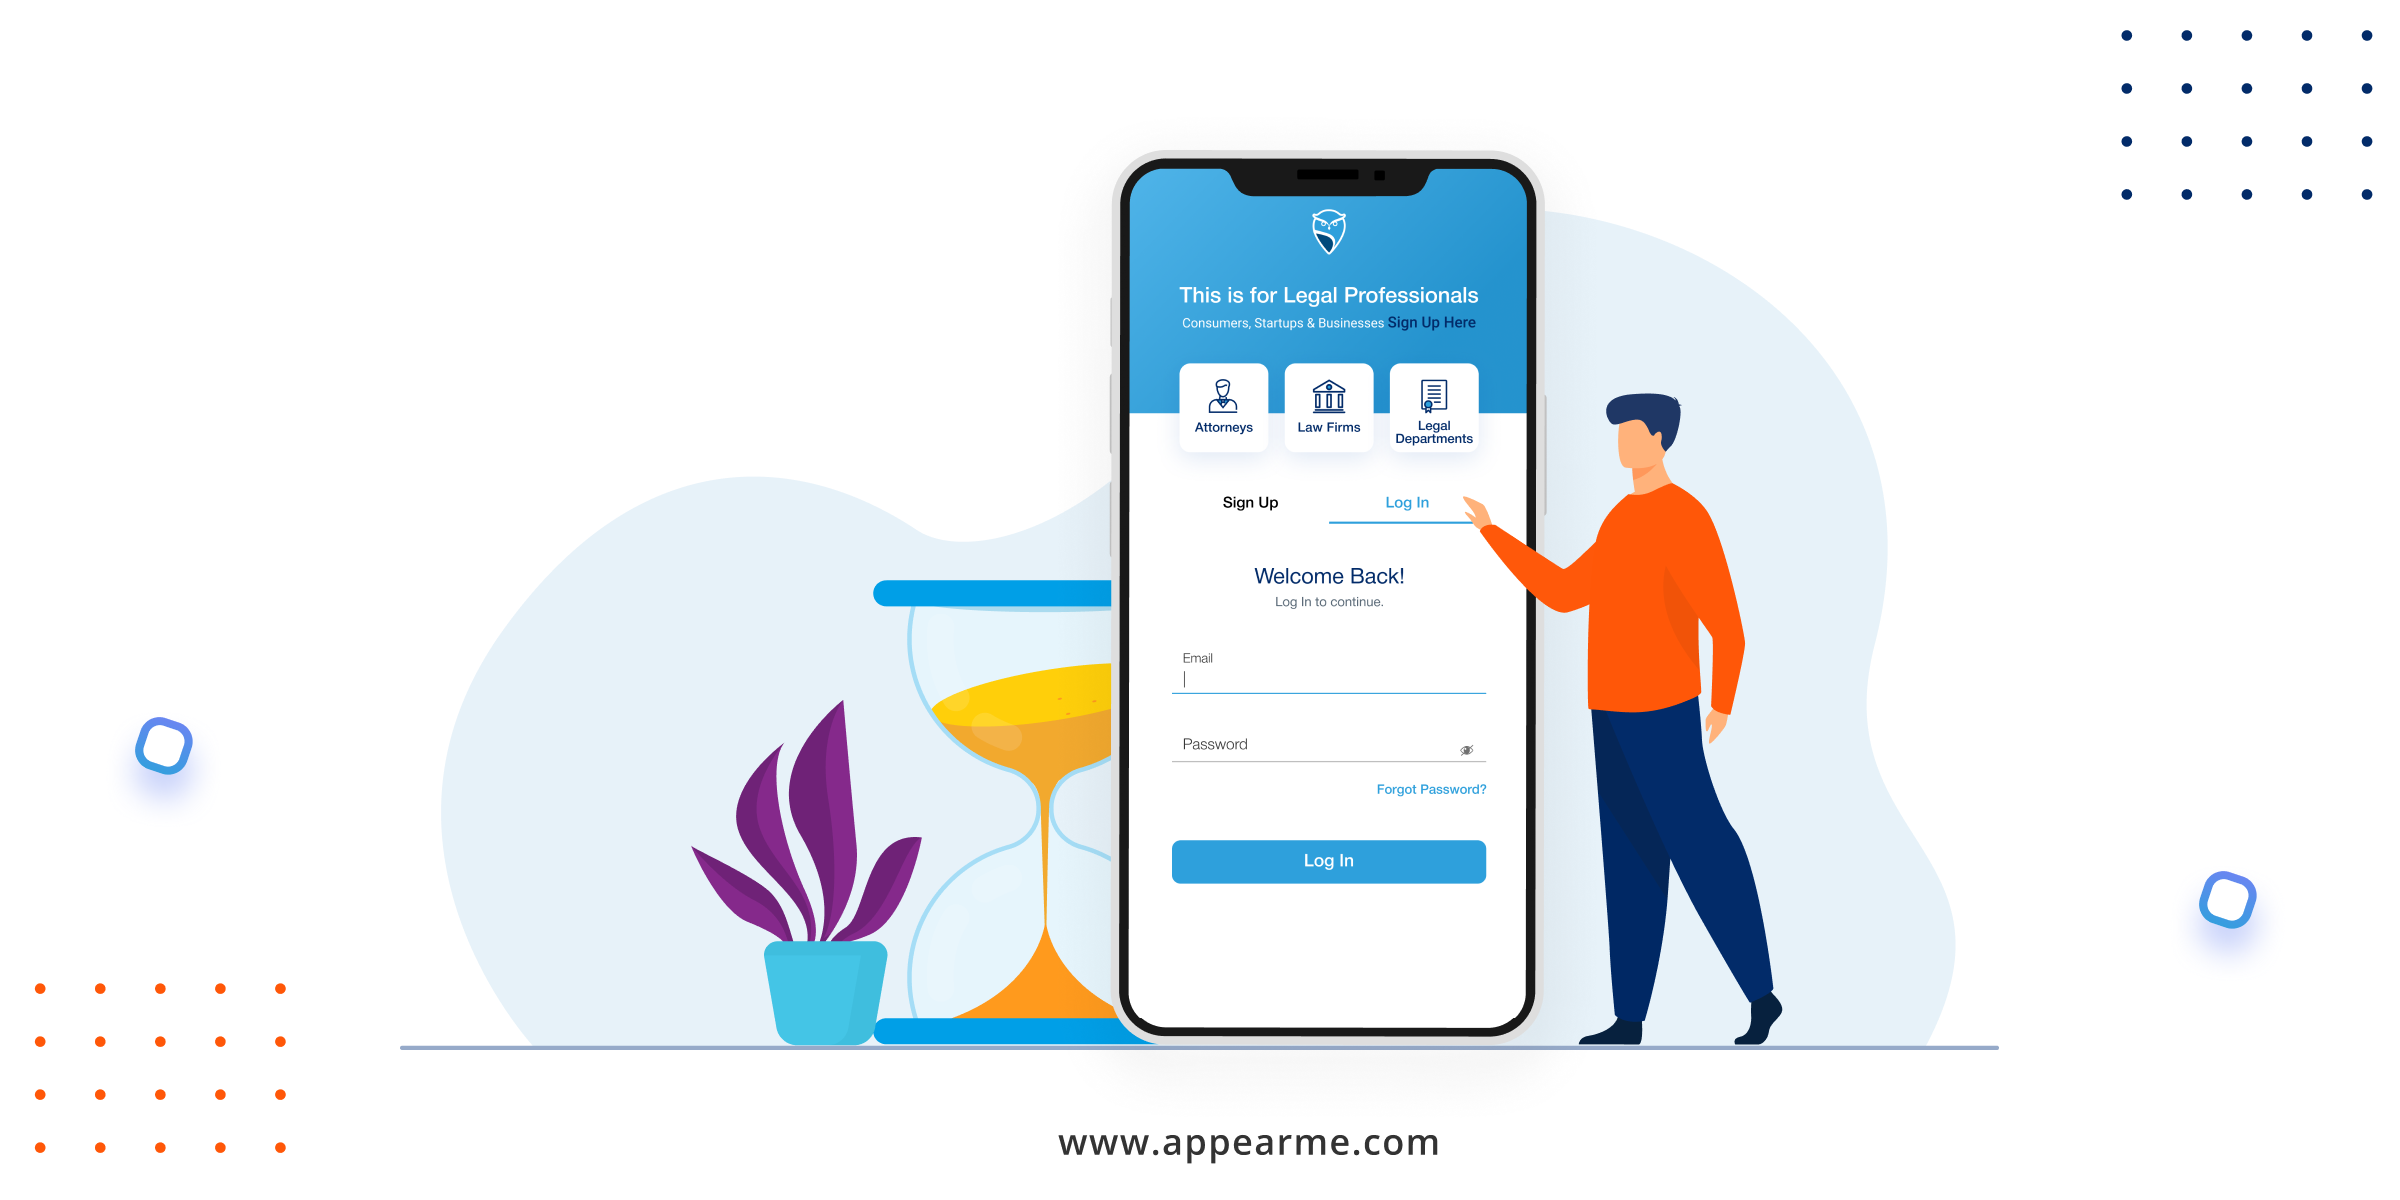 Download AppearMe and Find an Appearance Attorney within 60 Seconds